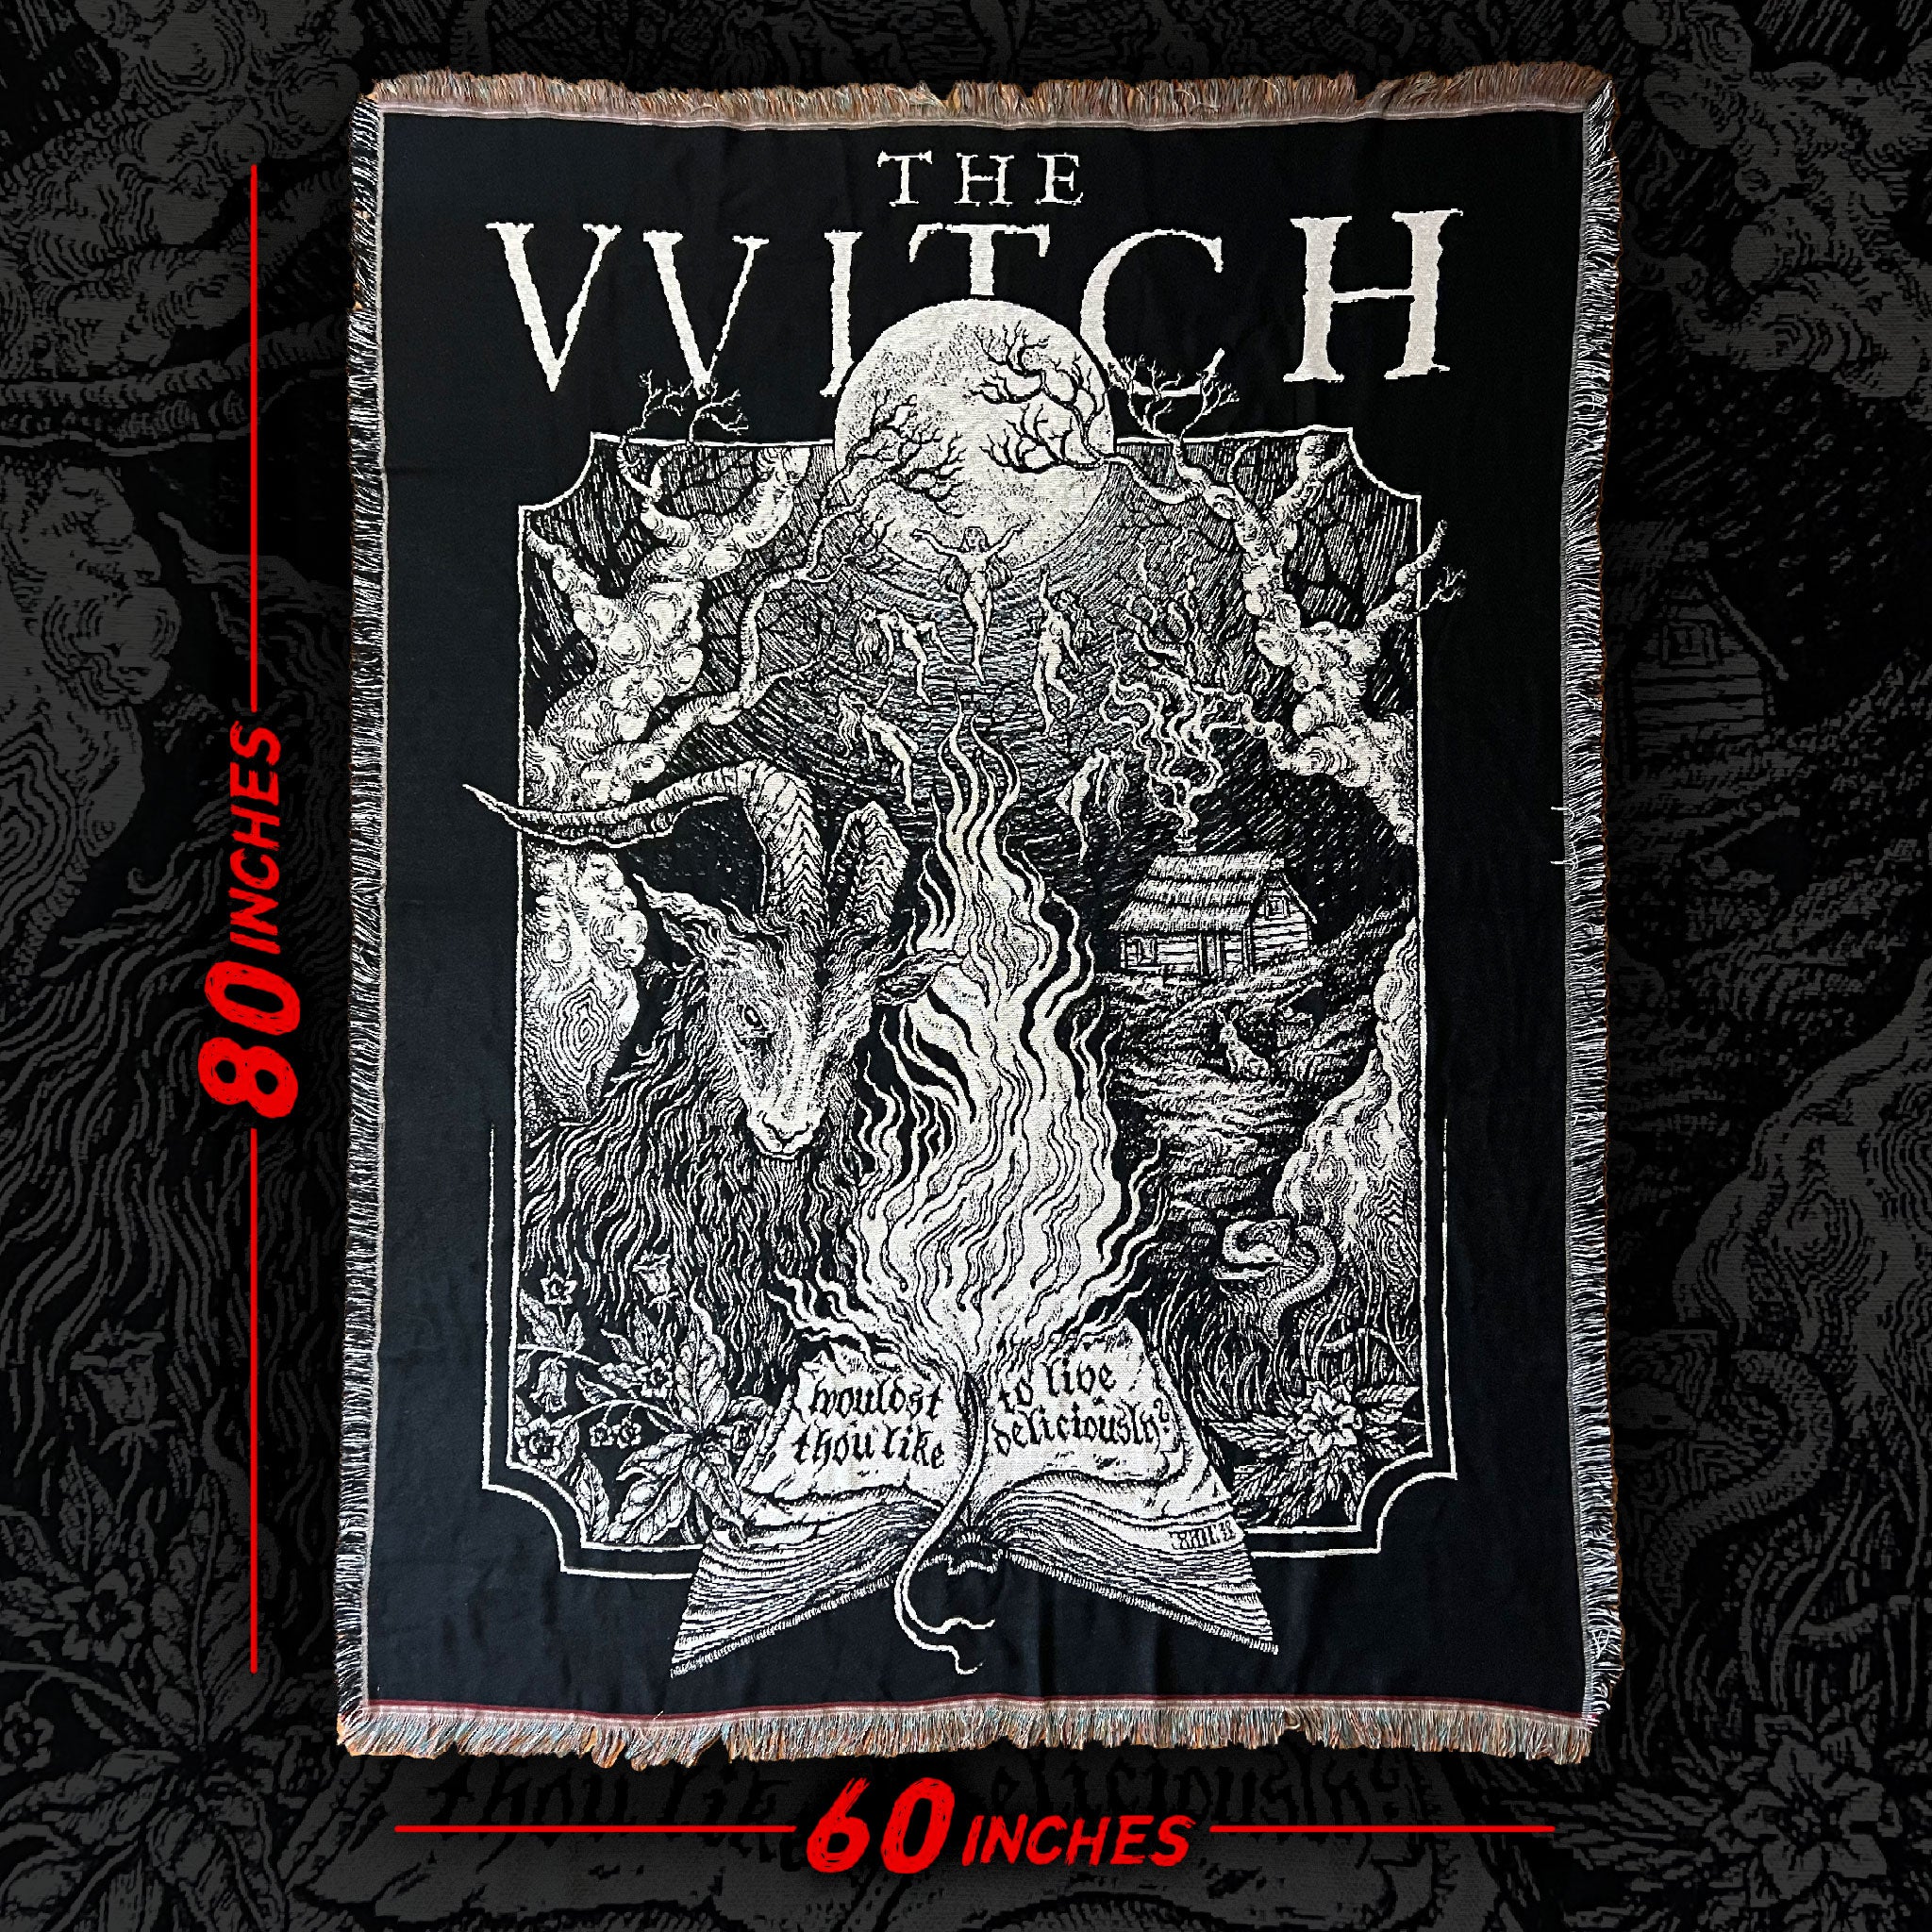 The VVitch "Guide Thy Hand" - 60" x 80" Woven Blanket